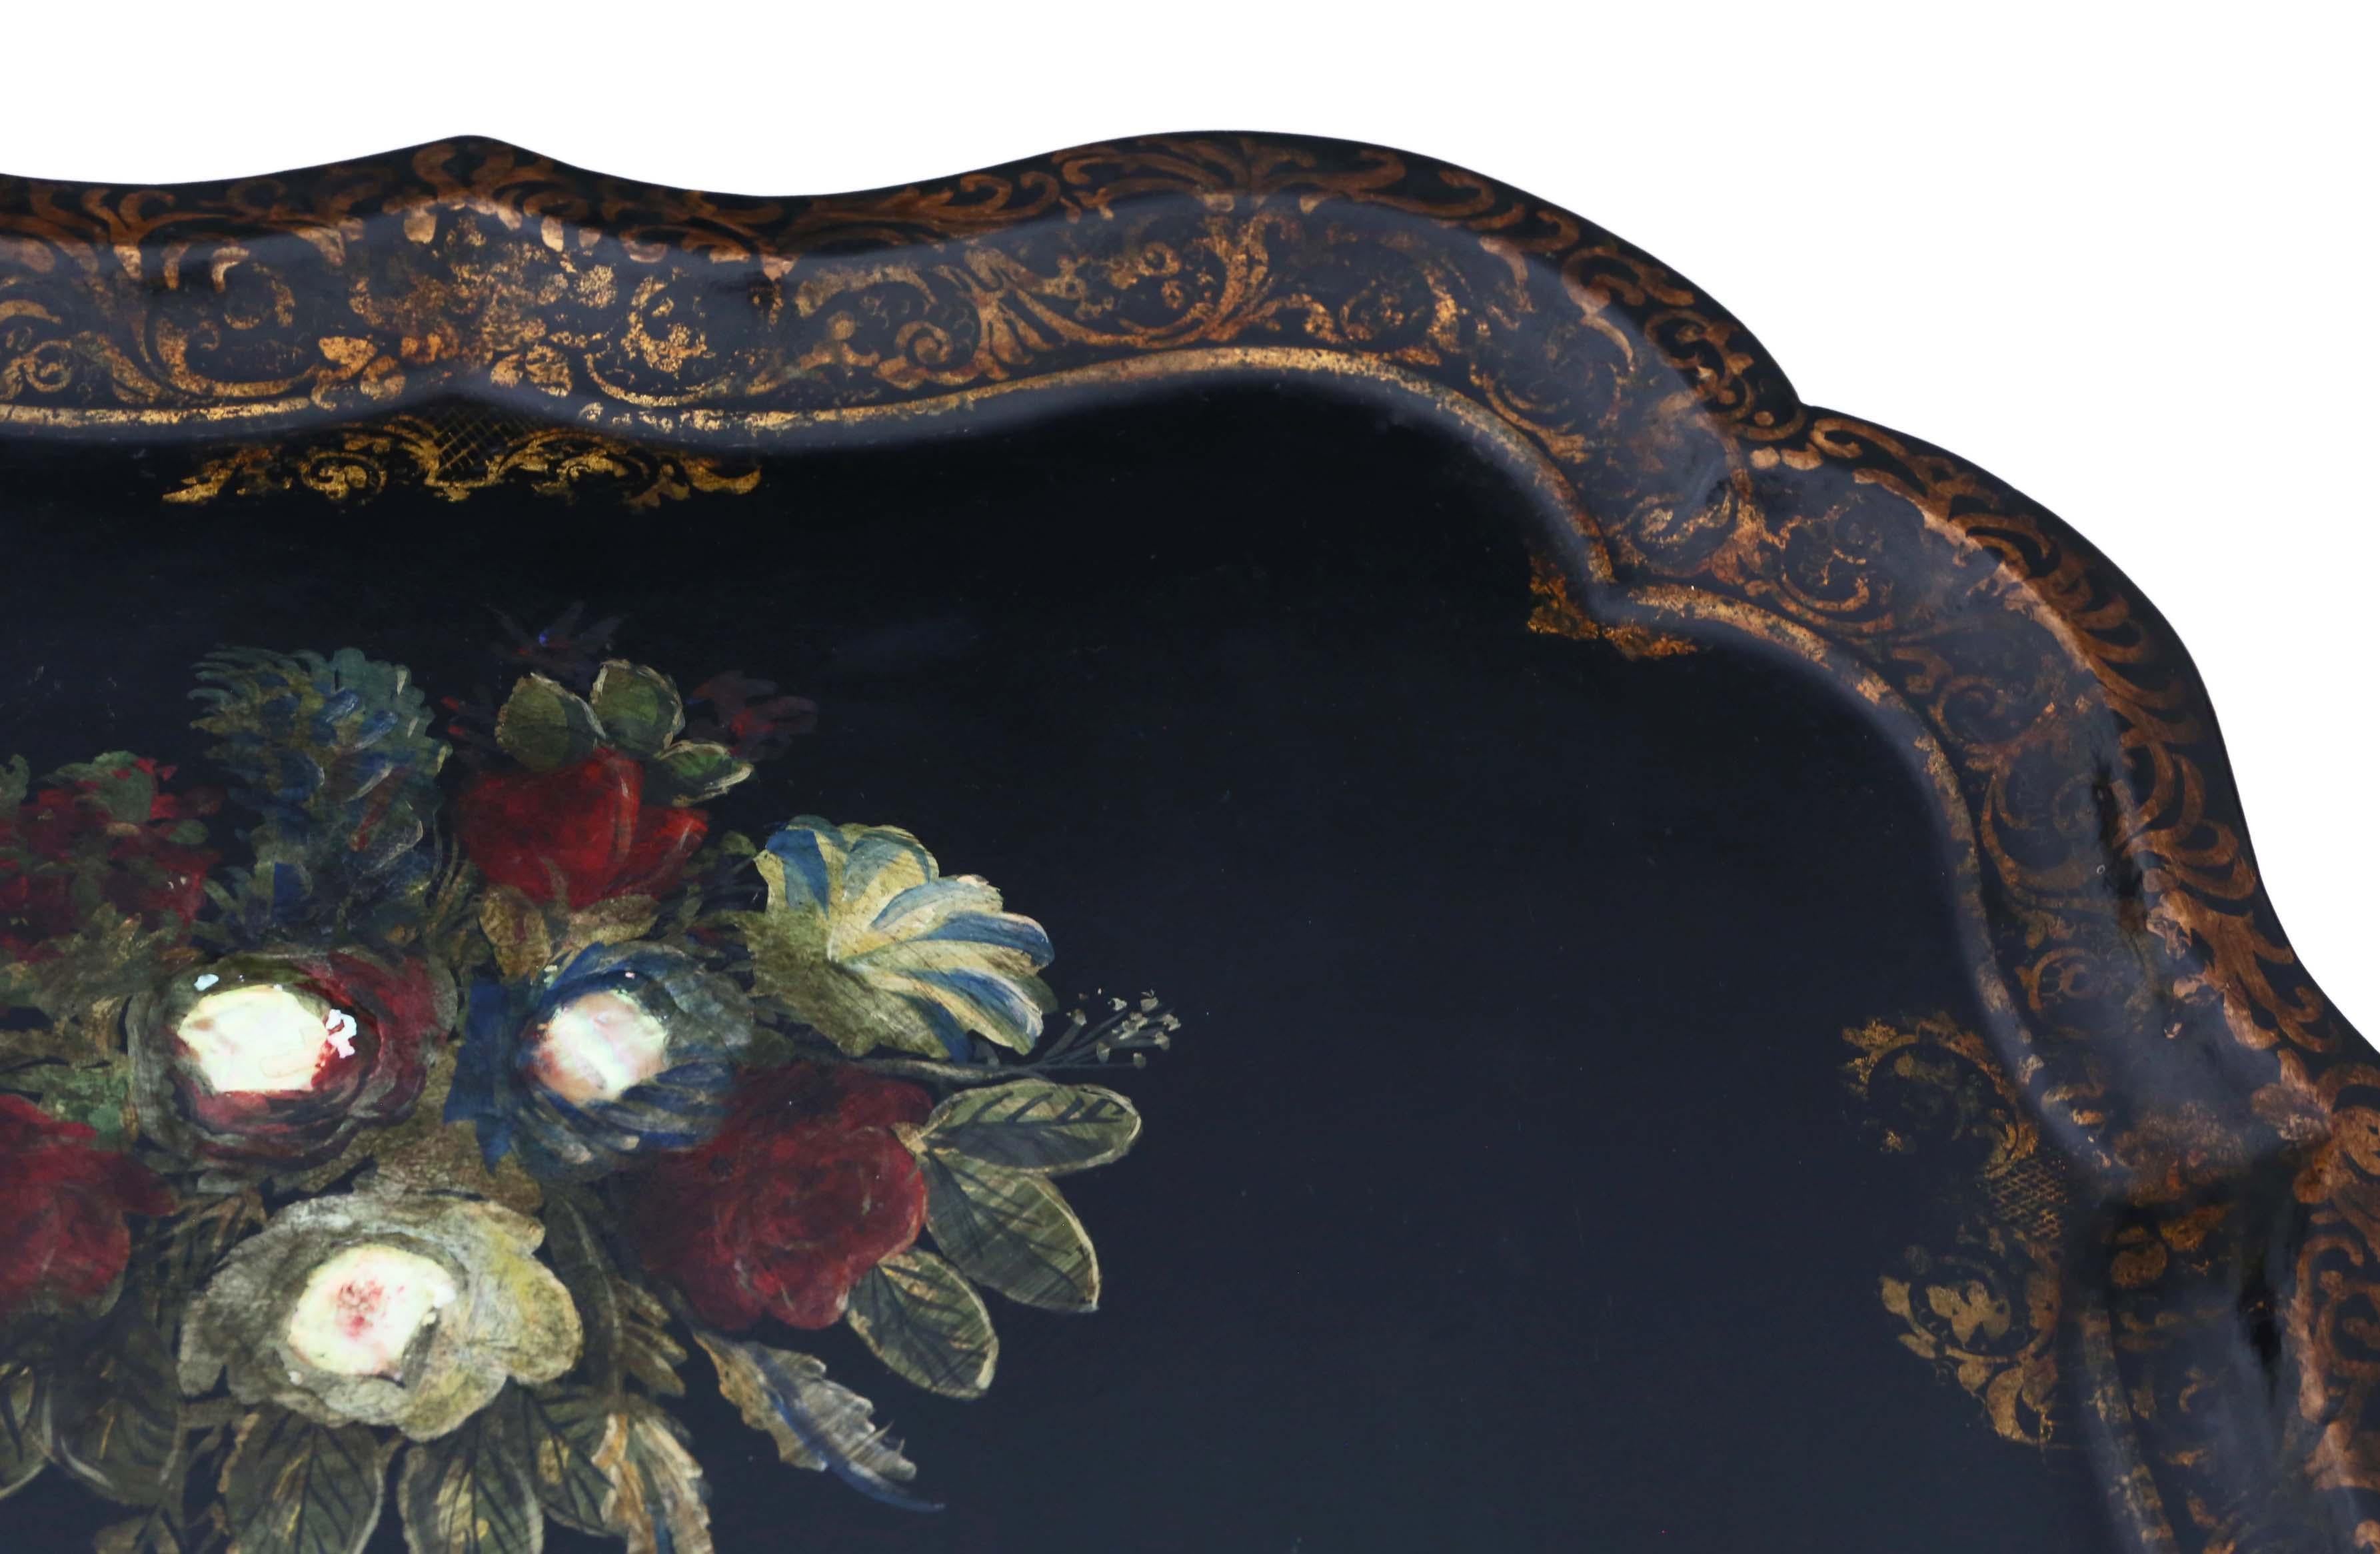 Late 19th Century Antique Victorian Tilt-Top Decorated Black Lacquer Tray Top Table Coffee